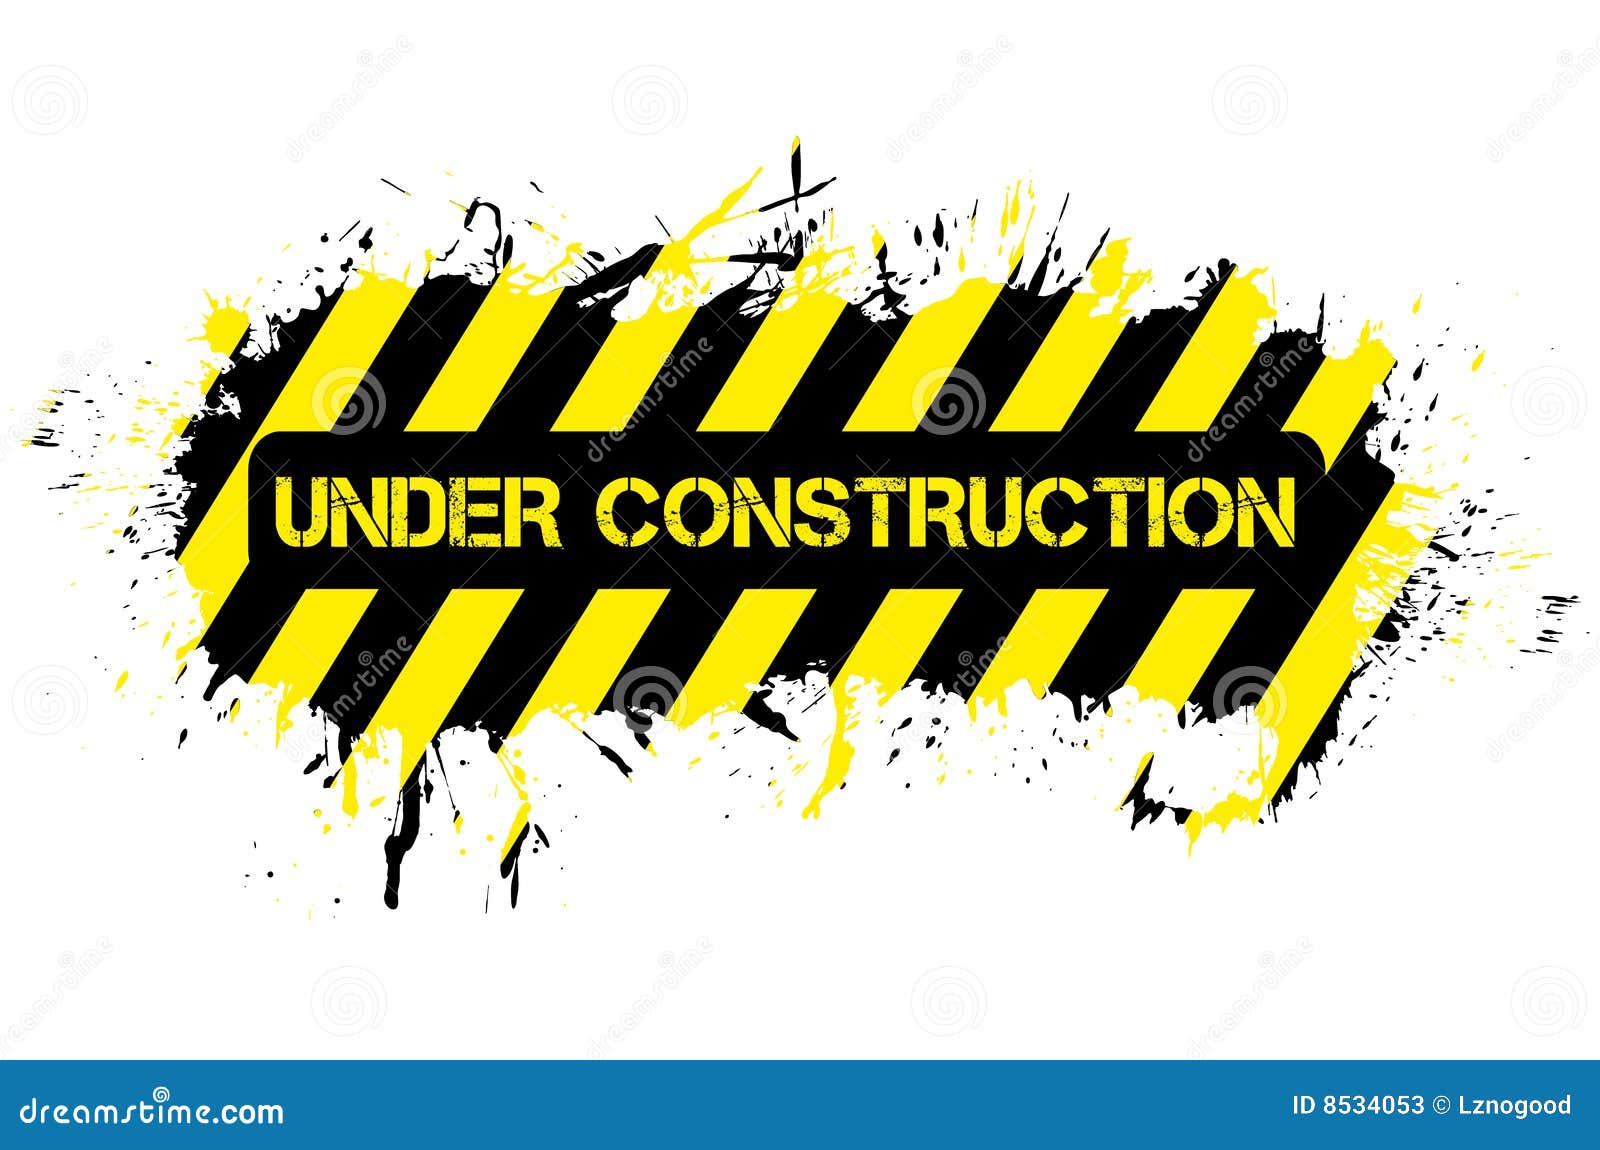 baby under construction clipart - photo #37